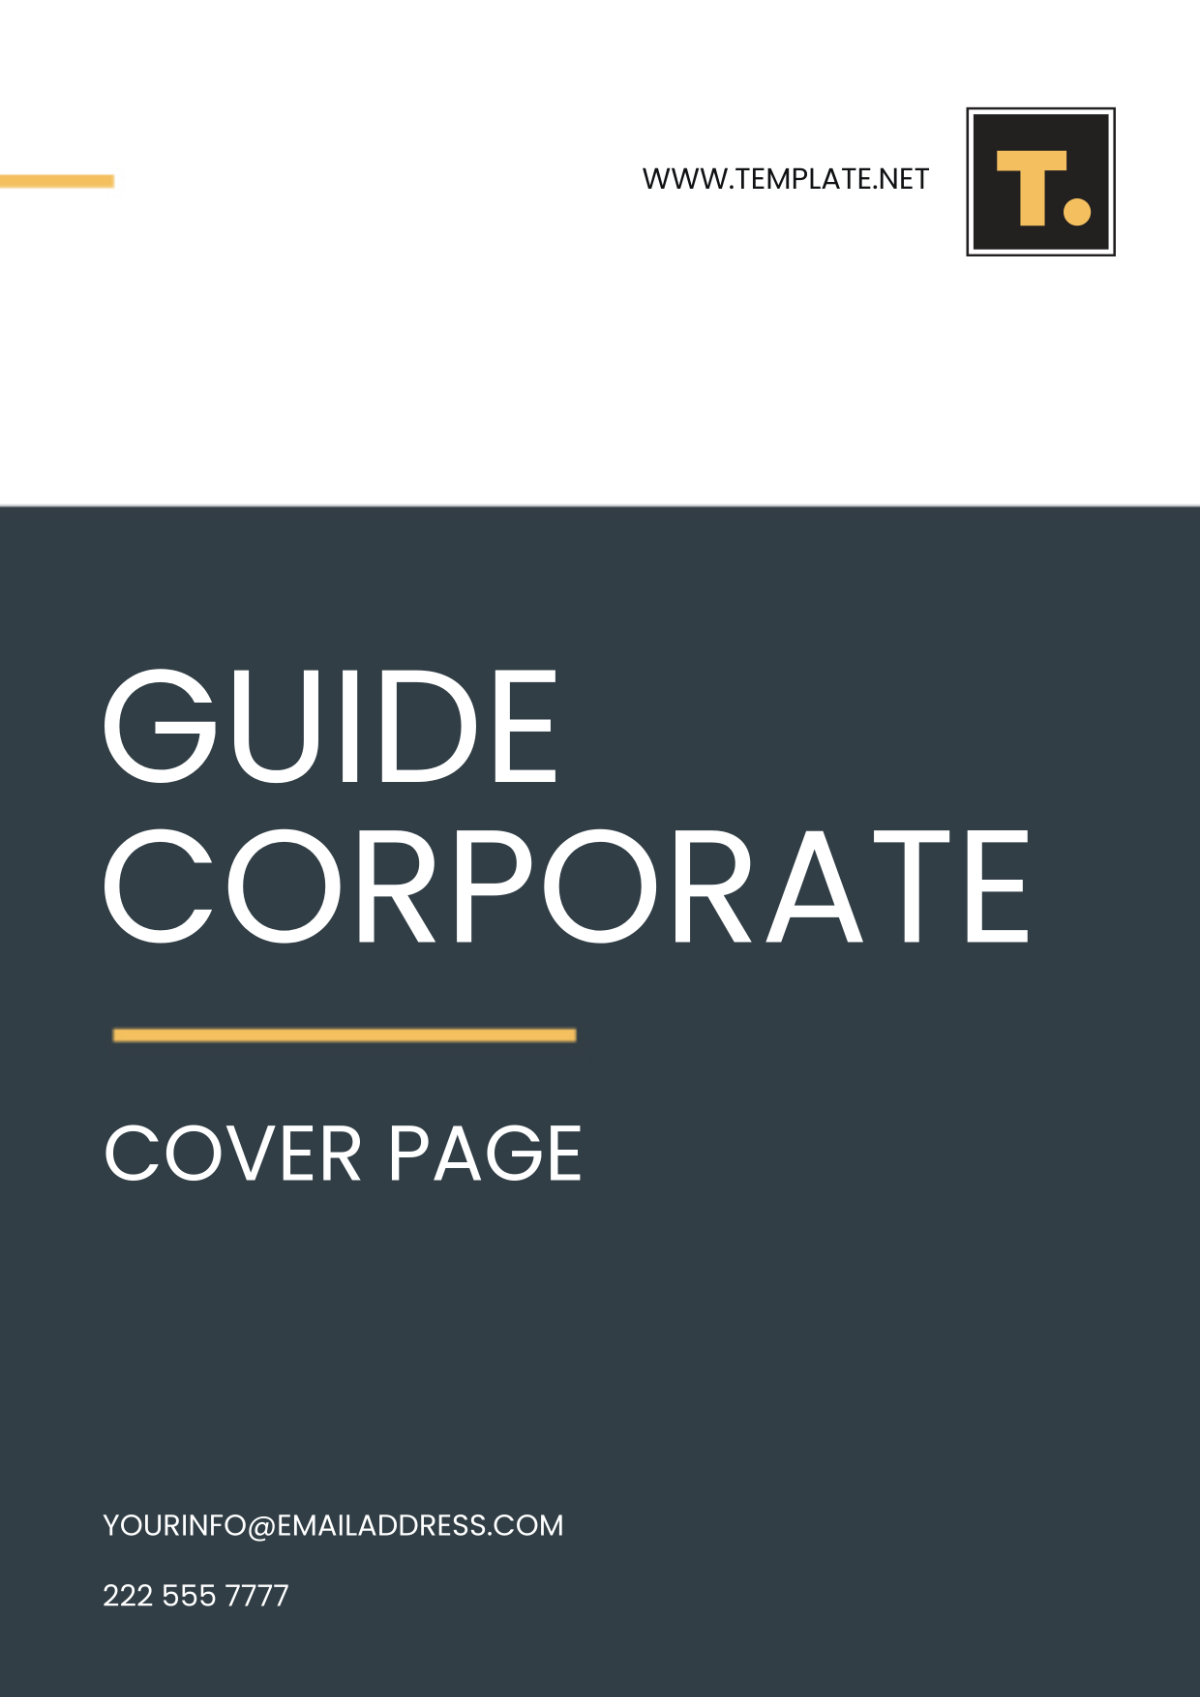 Guide Corporate Cover Page Template